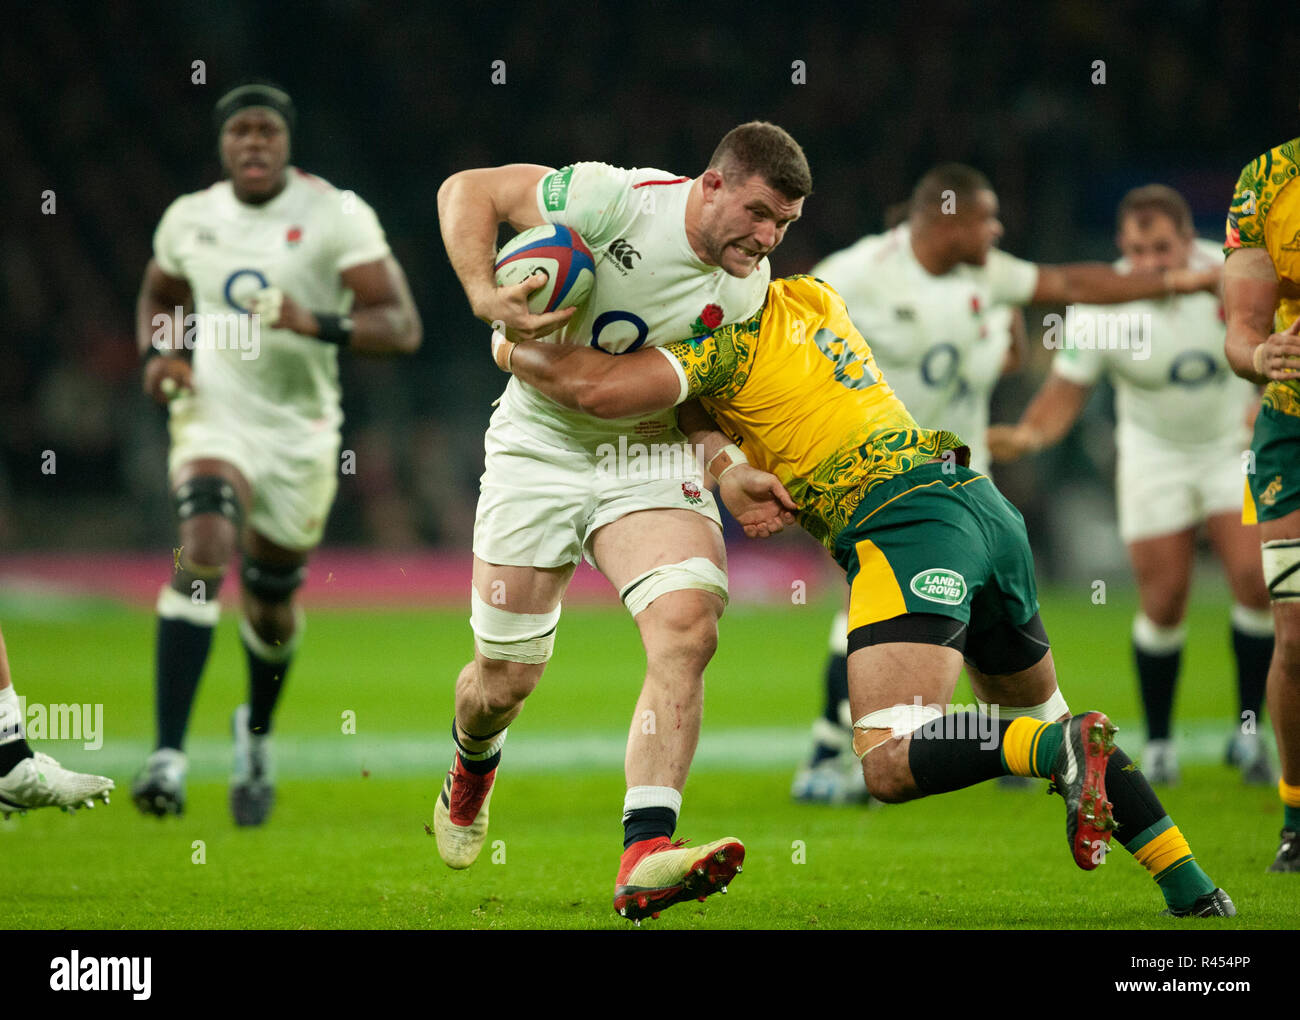 Twickenham, UK. 24th November 2018. England's Mark Wilson is tackled by Australia's Pete Samu during the Quilter International Rugby match between England and Australia. Andrew Taylor/Alamy Live News Stock Photo